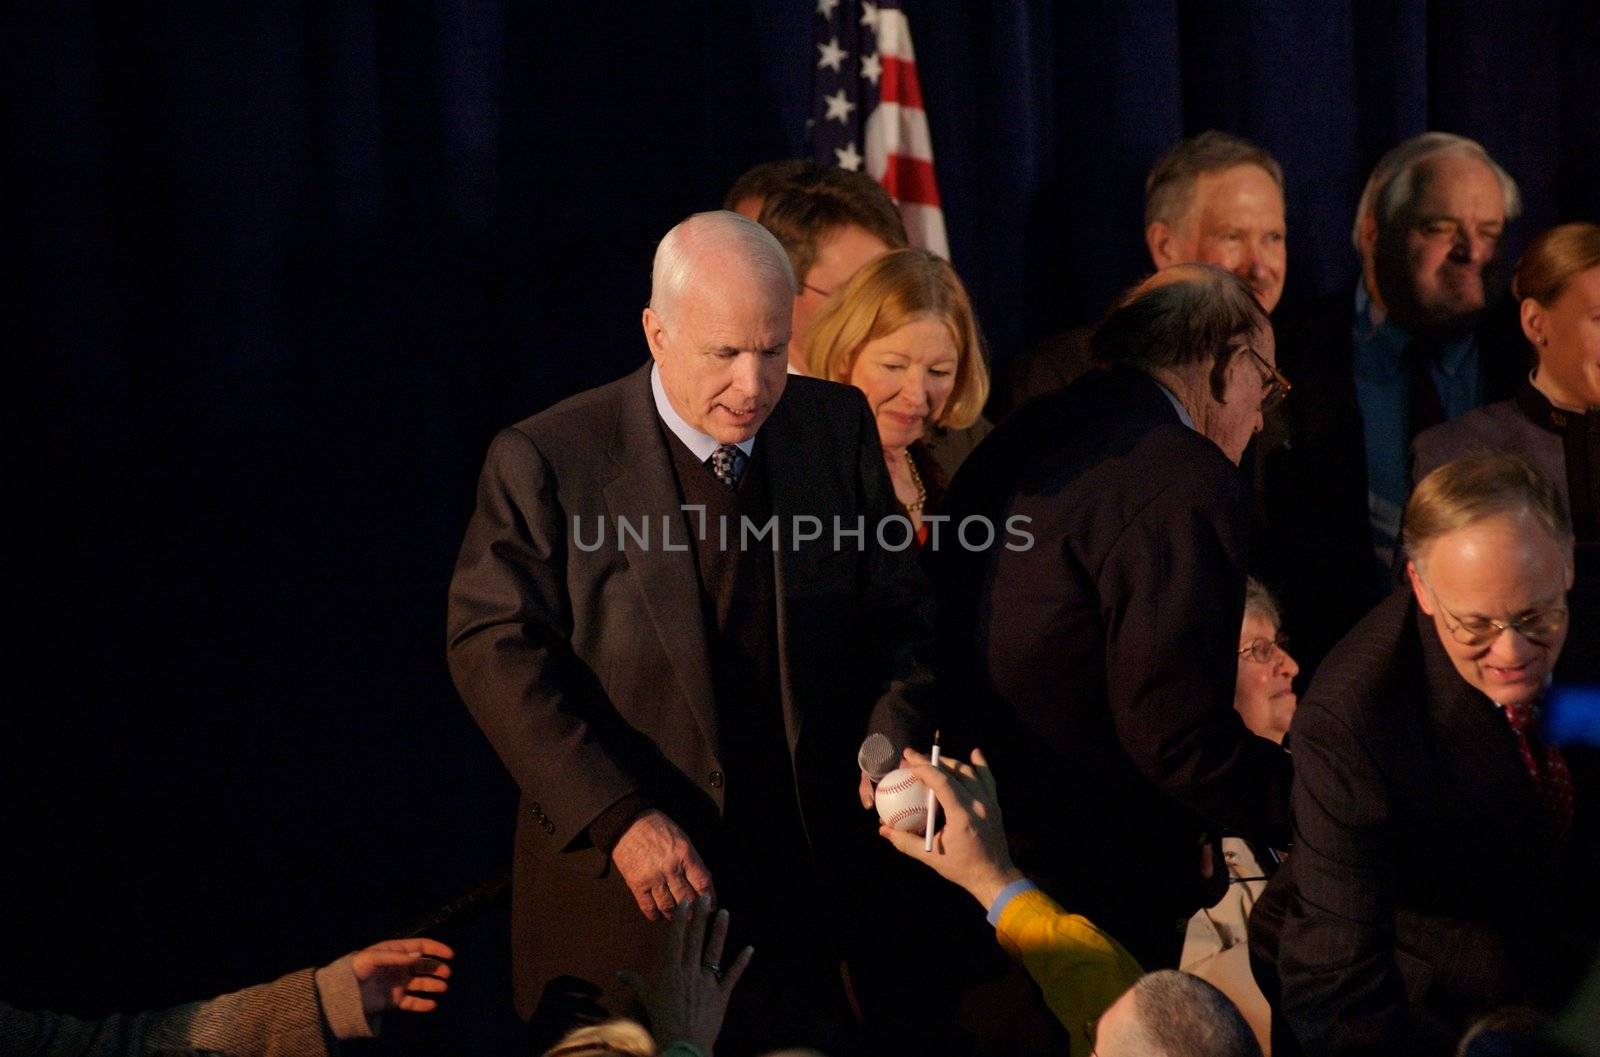 Senator John McCain, on his presidential campaign, gives a speech in South Burlington, VT.  This one is particular because a member of the crowd is handing McCain a baseball to sign.